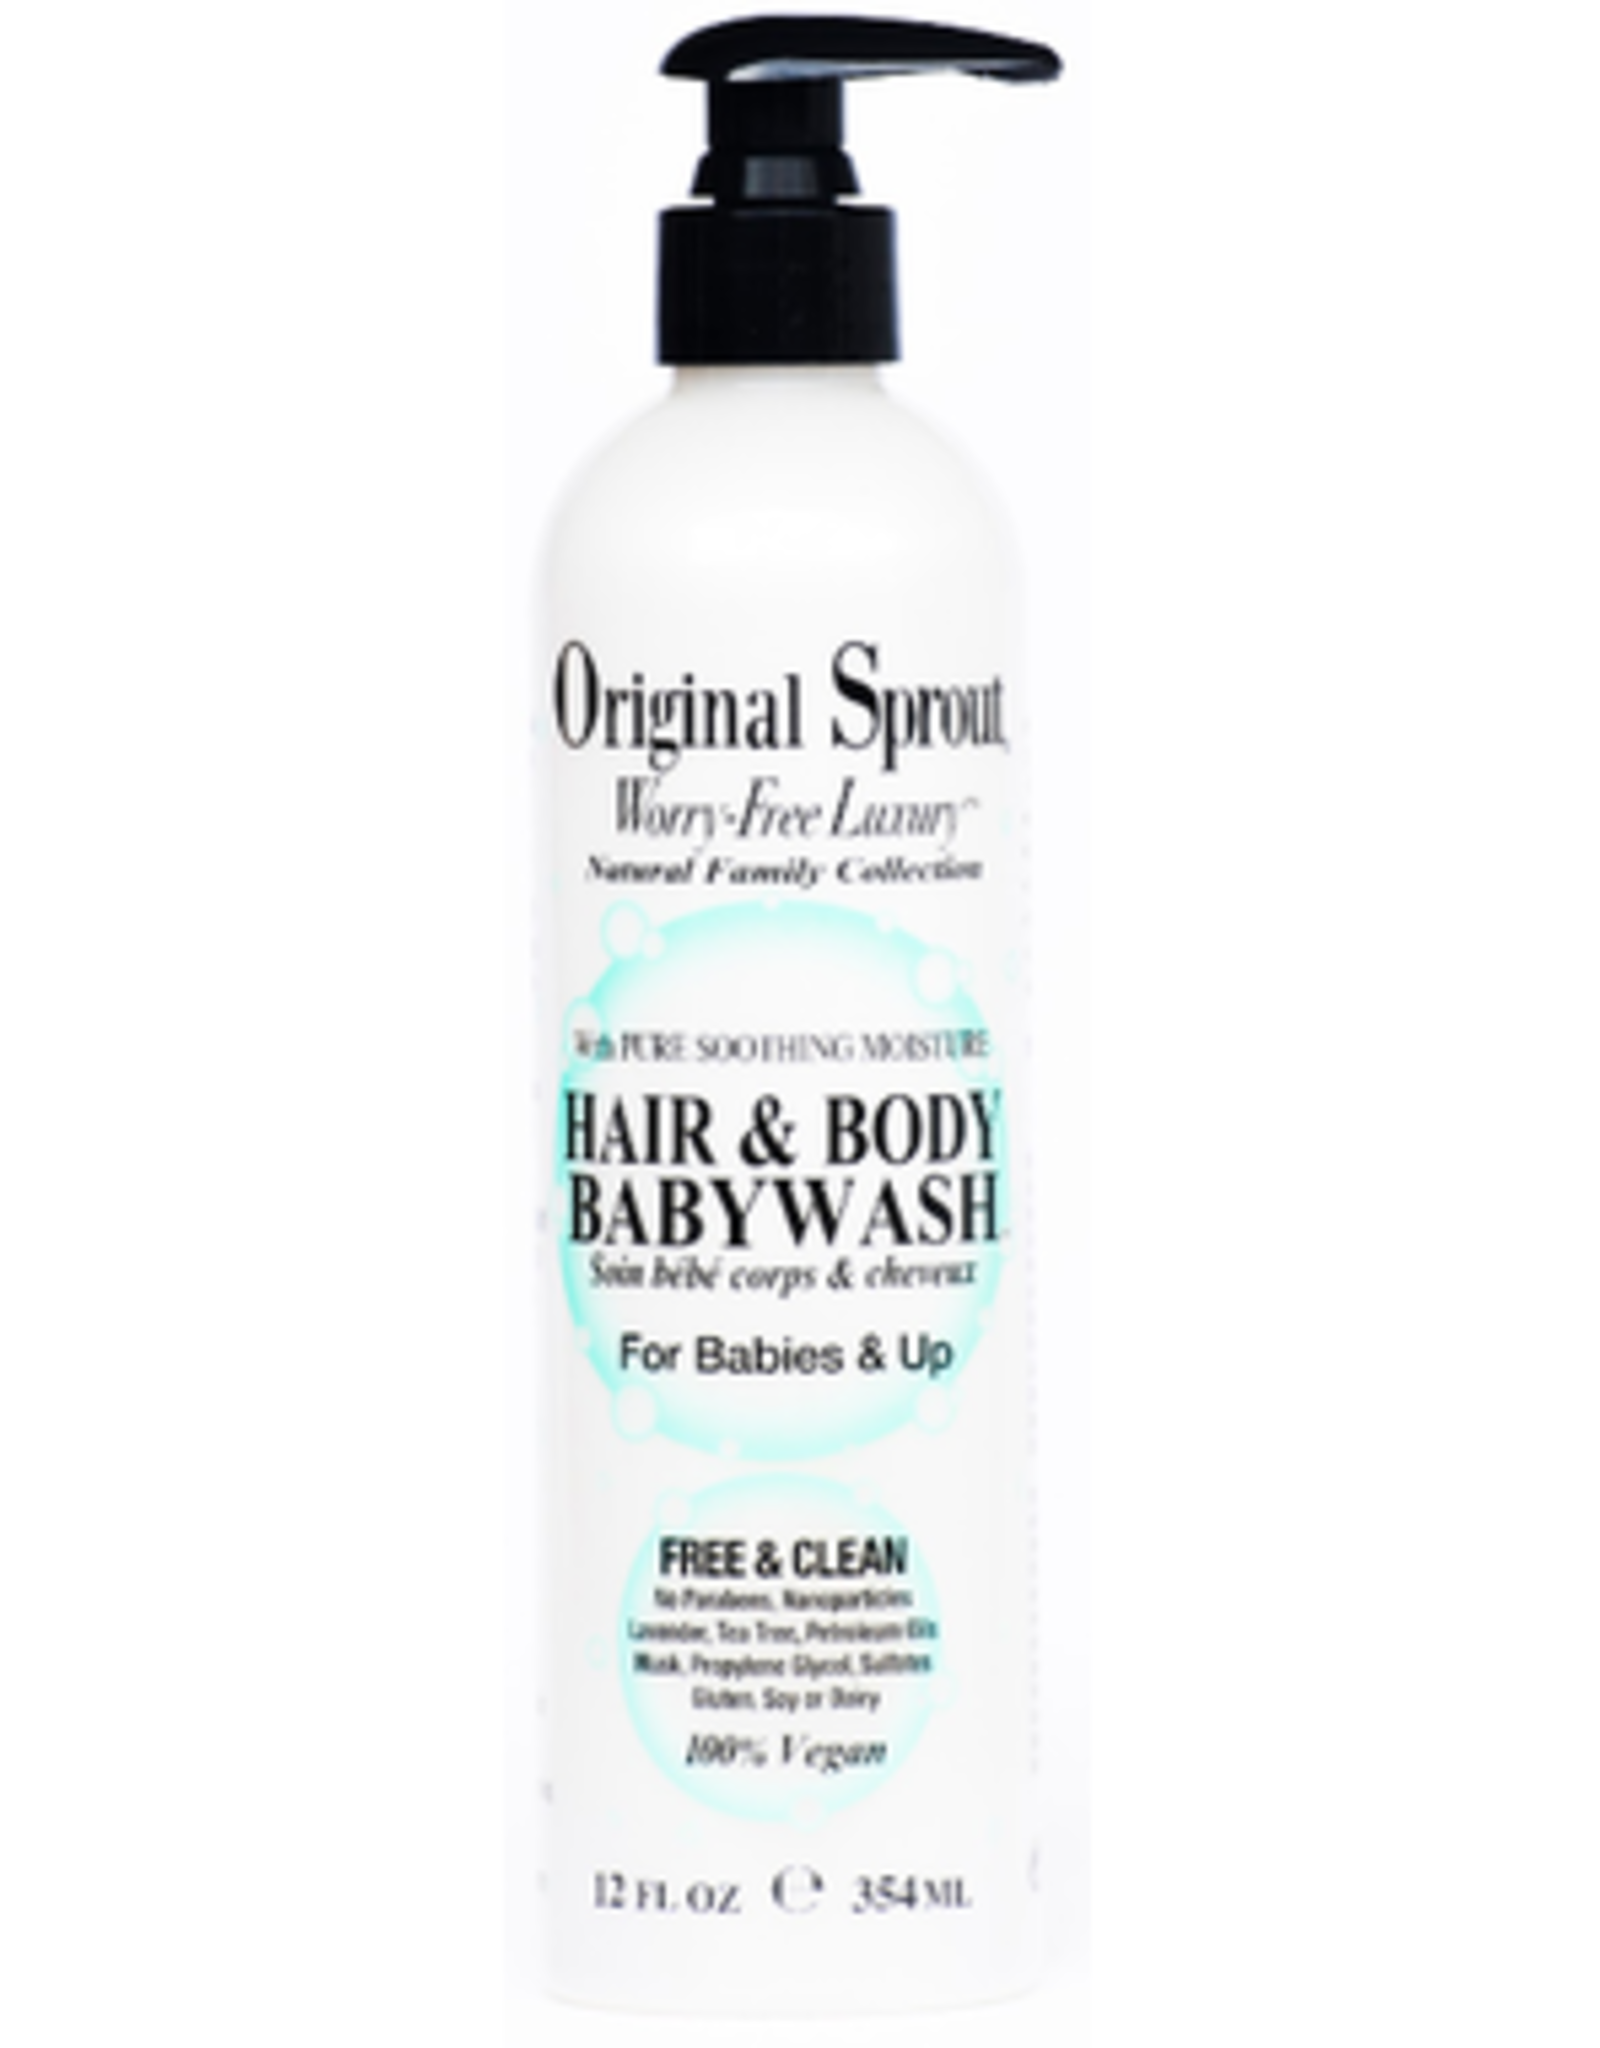 Original Sprout Original Sprout - Hair & Body Baby Wash 12oz.